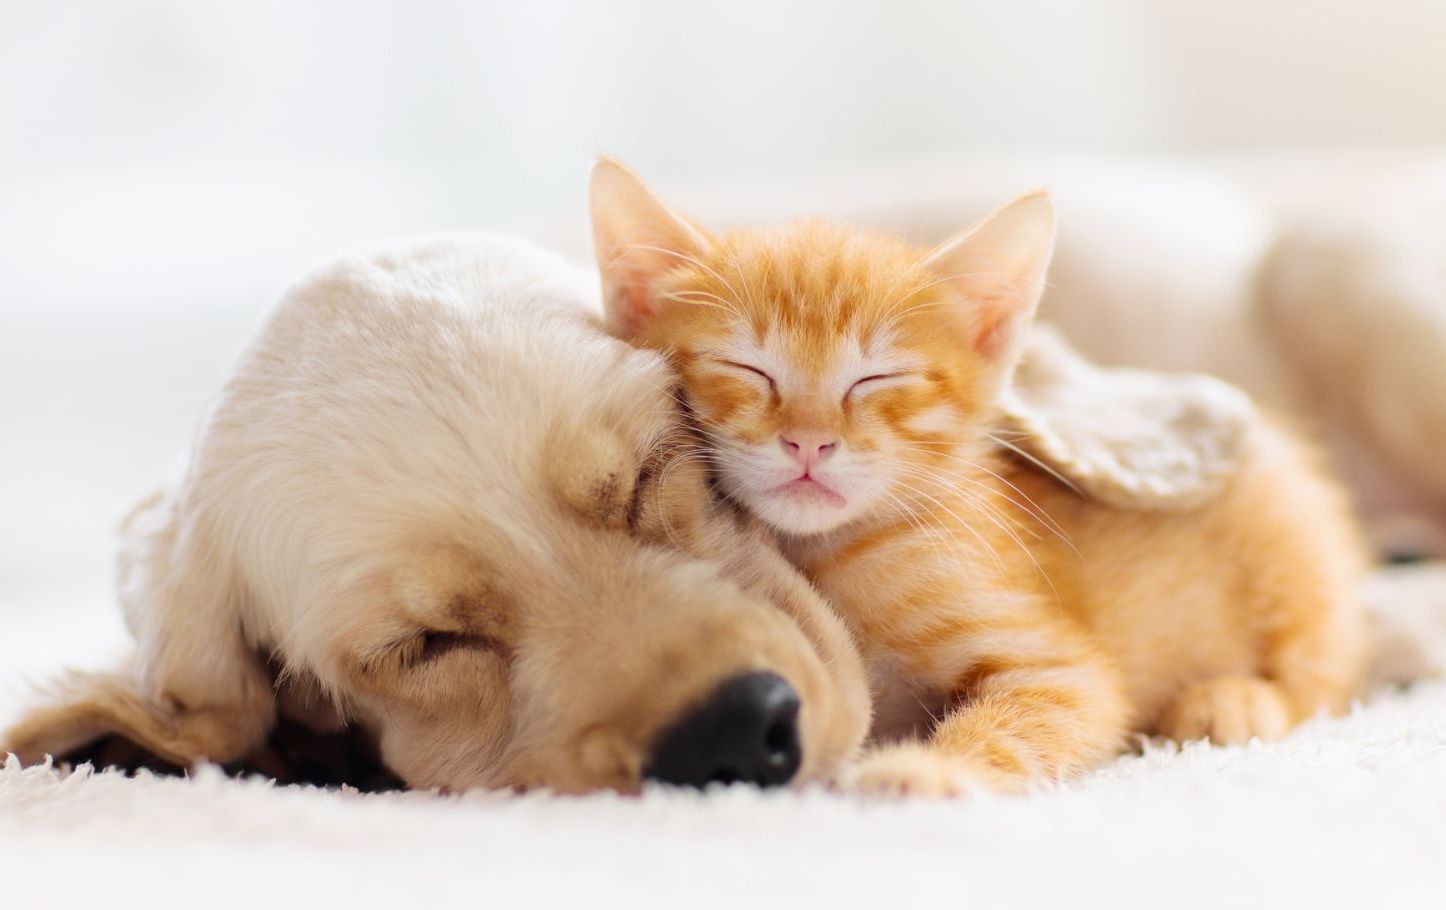 Puppy and kitten napping